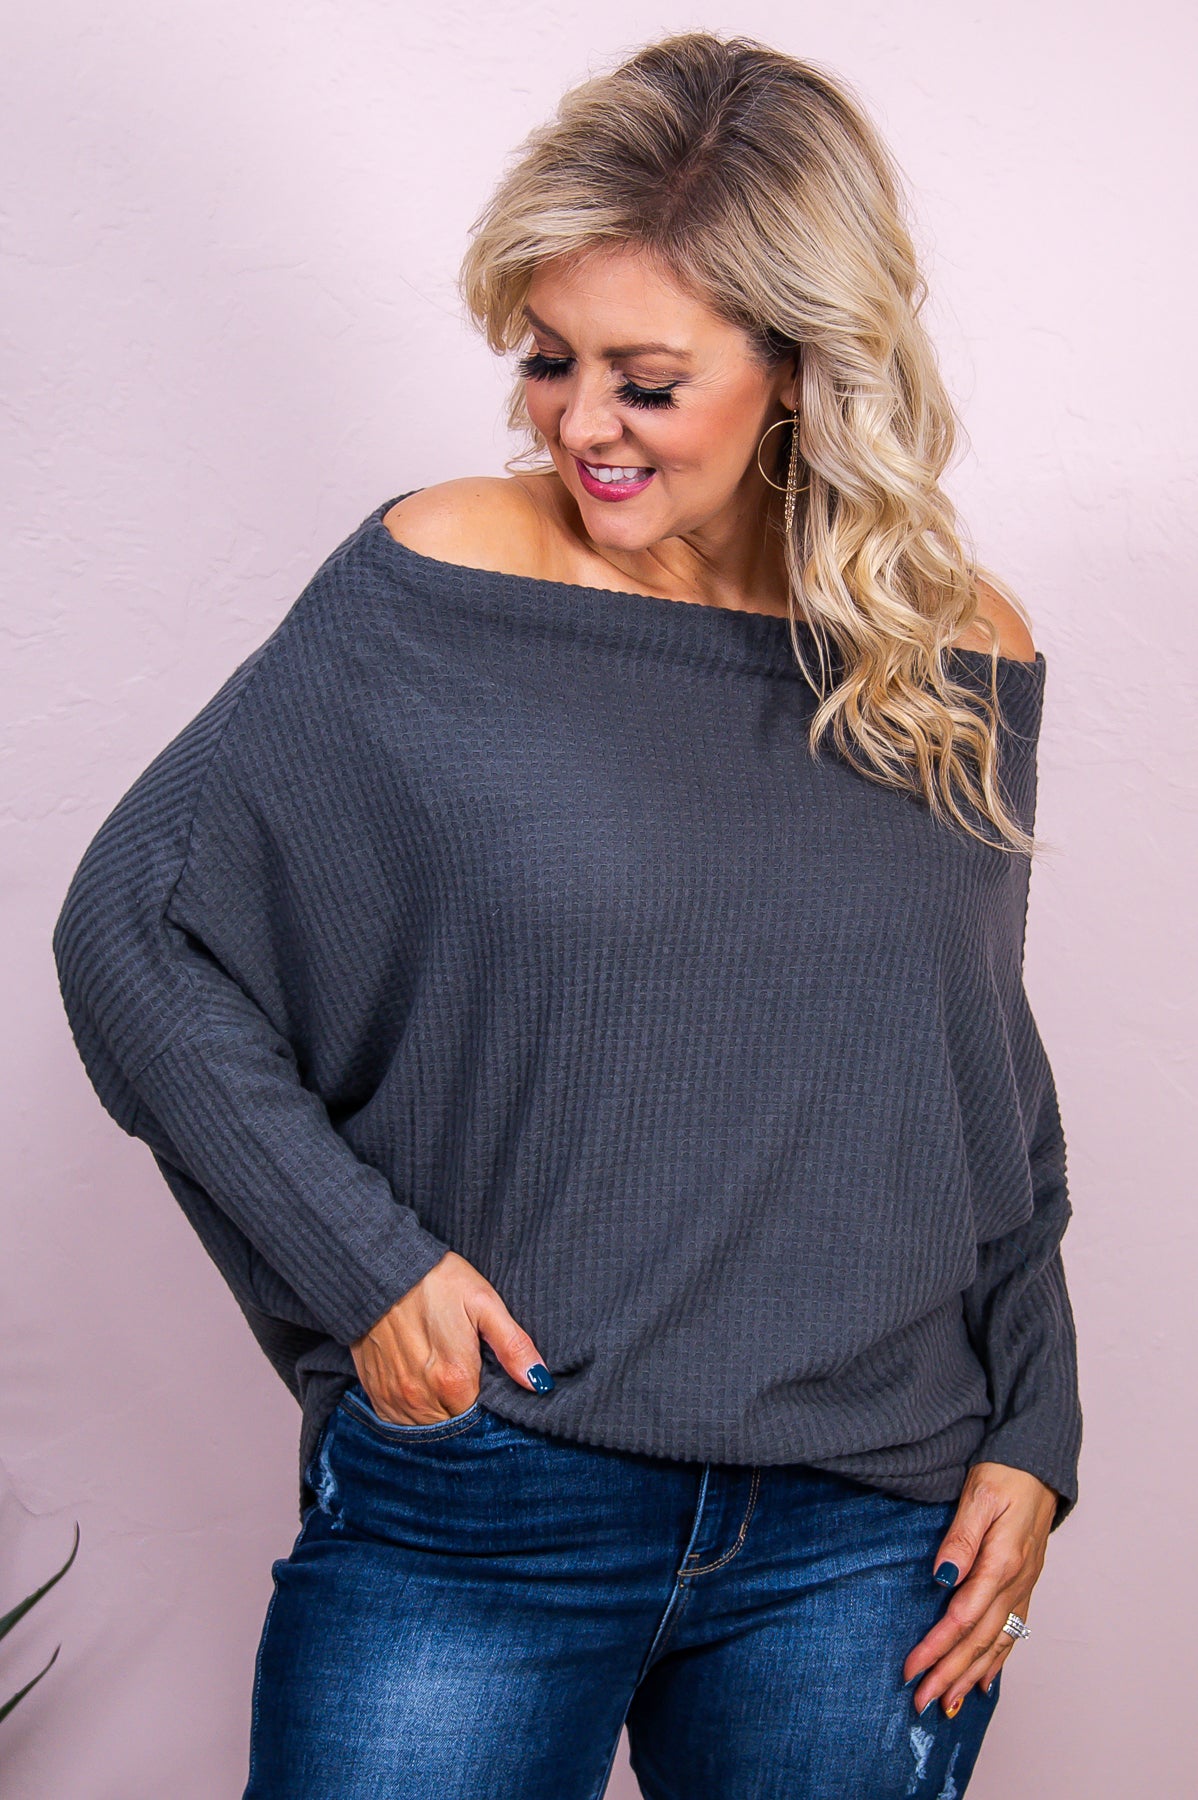 One Good Reason Charcoal Gray Solid Slouchy Top - T8281CH